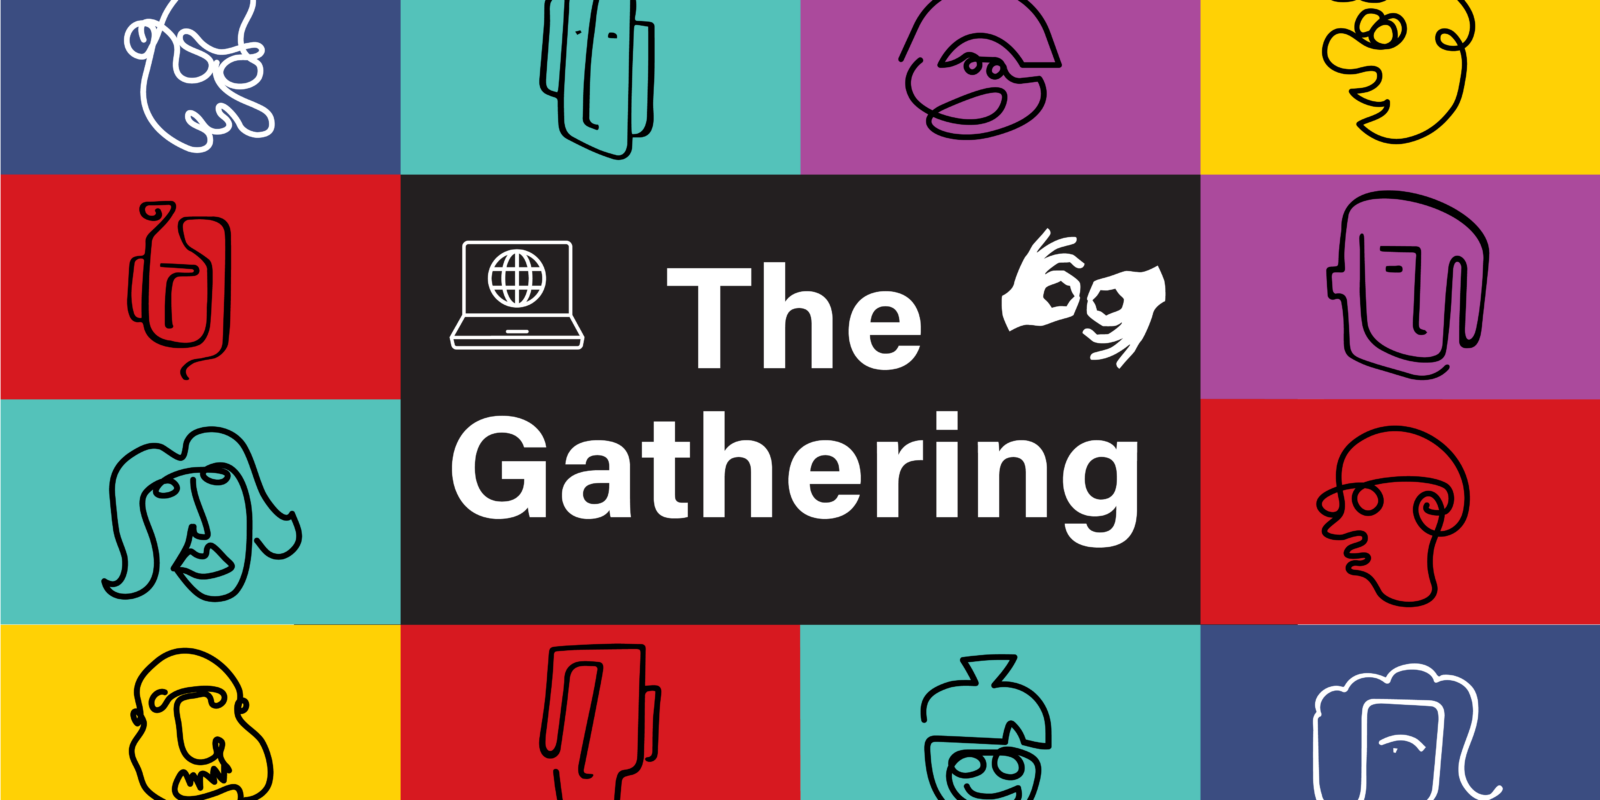 coloured boxes are filled with line drawings of people. in the cedntre there is an online event and auslan sybols. below it says The Gathering.